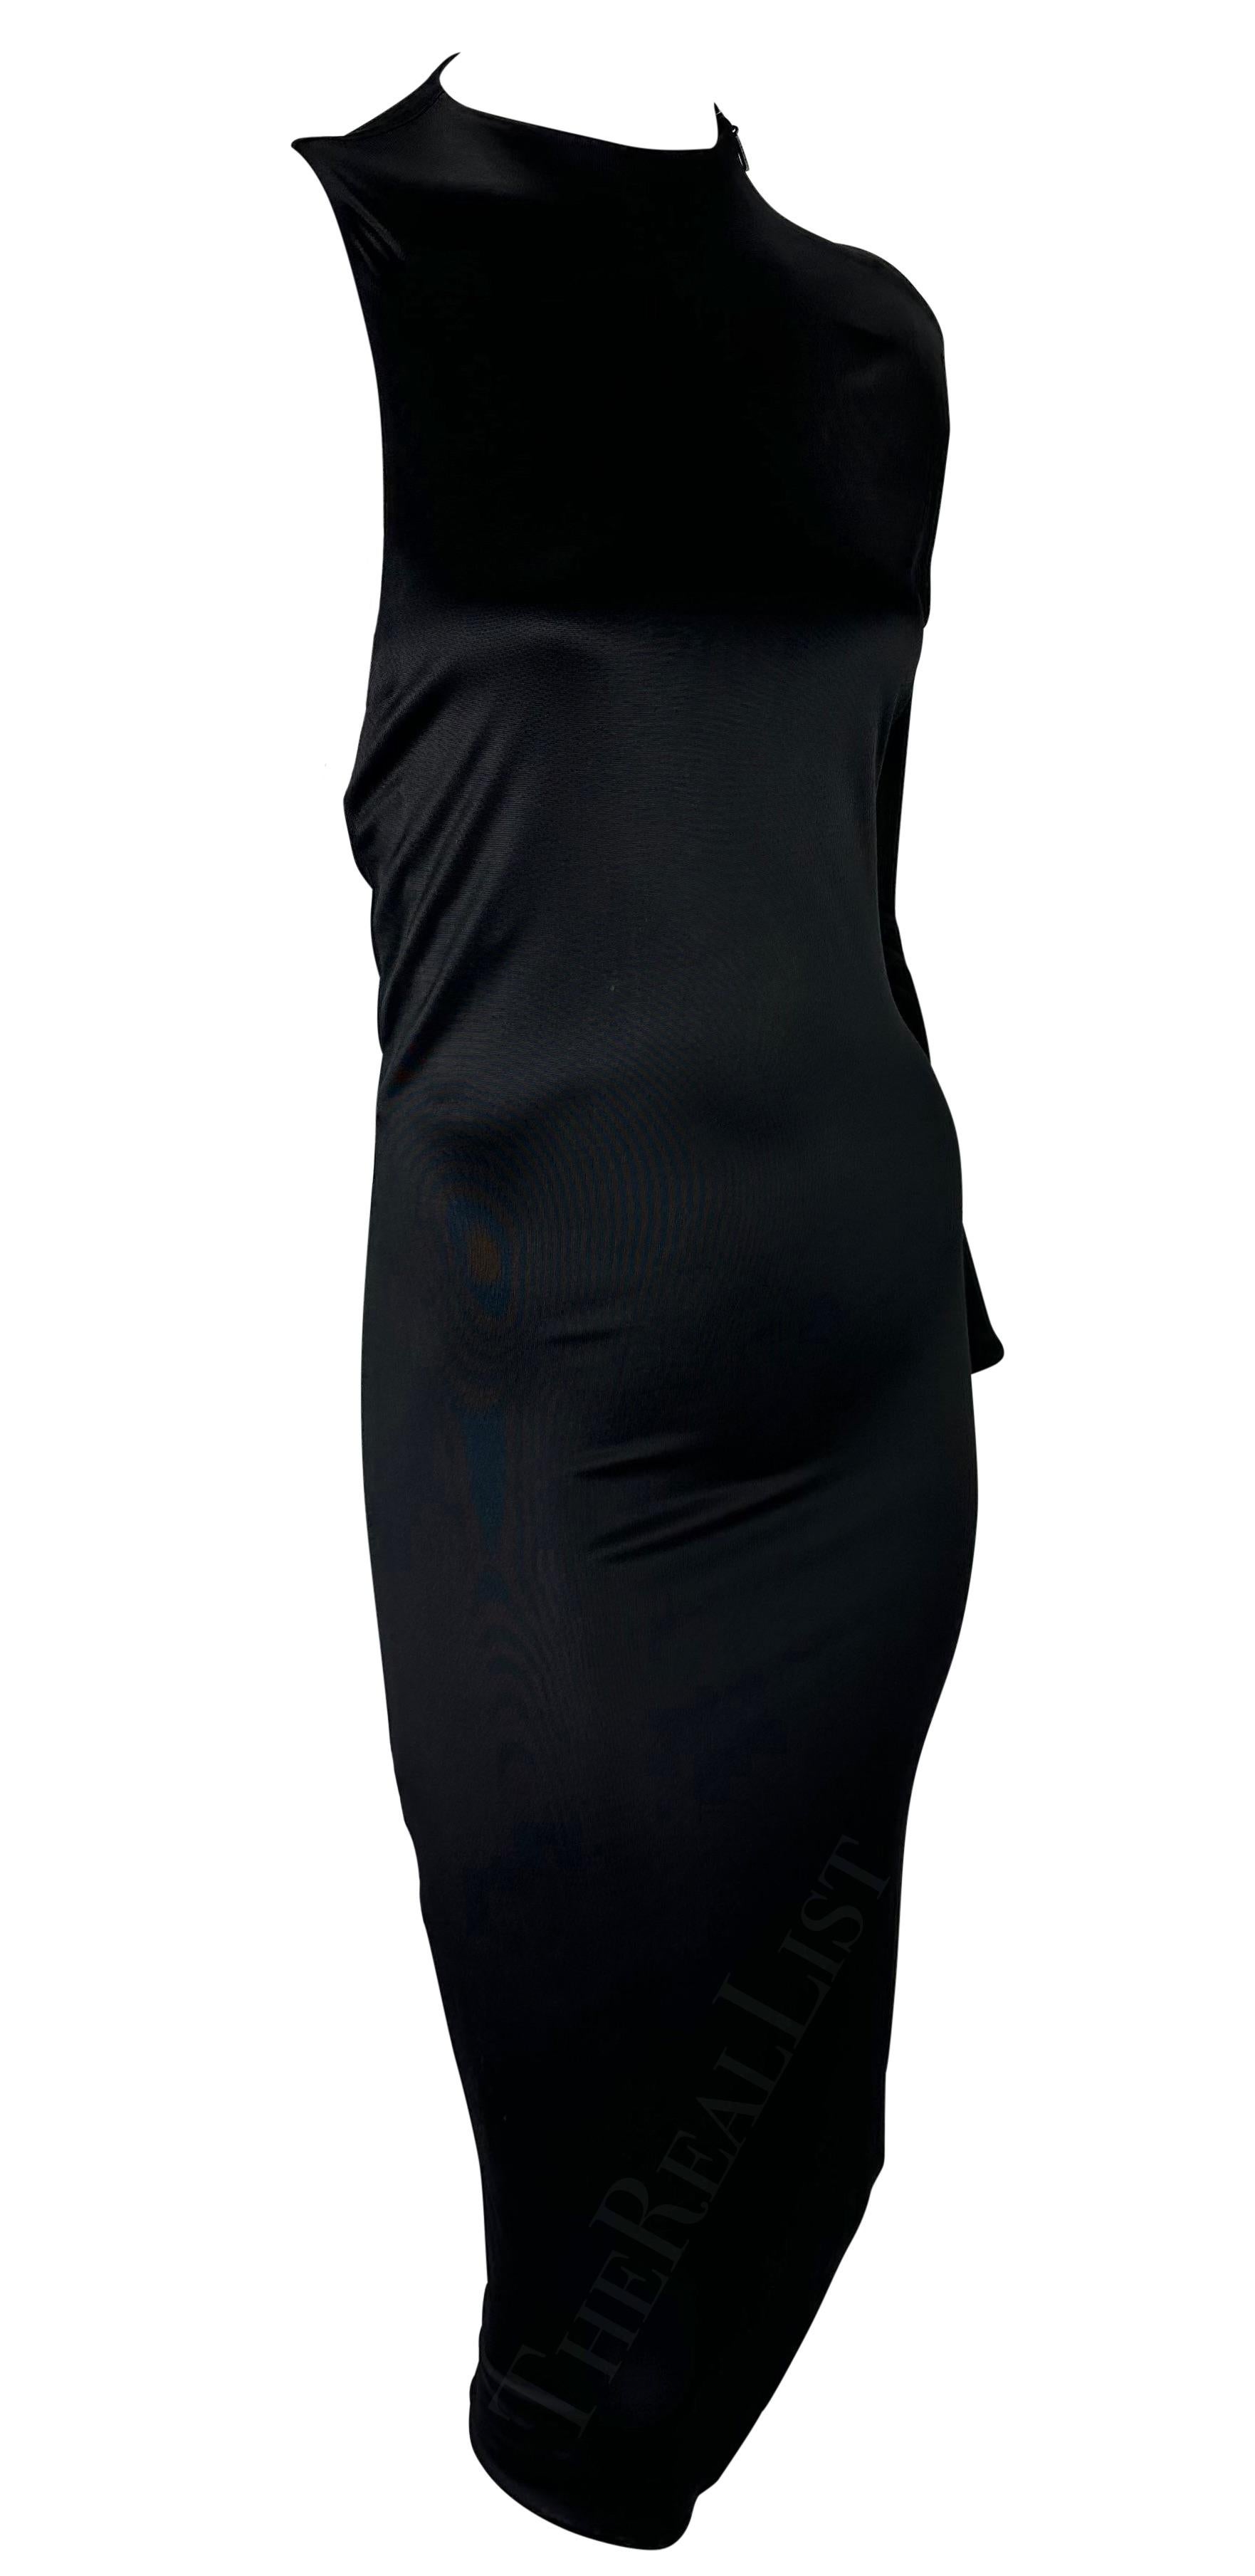 S/S 2000 Gucci by Tom Ford Cutout One-Sleeve Black Bodycon Stretch Dress In Good Condition For Sale In West Hollywood, CA